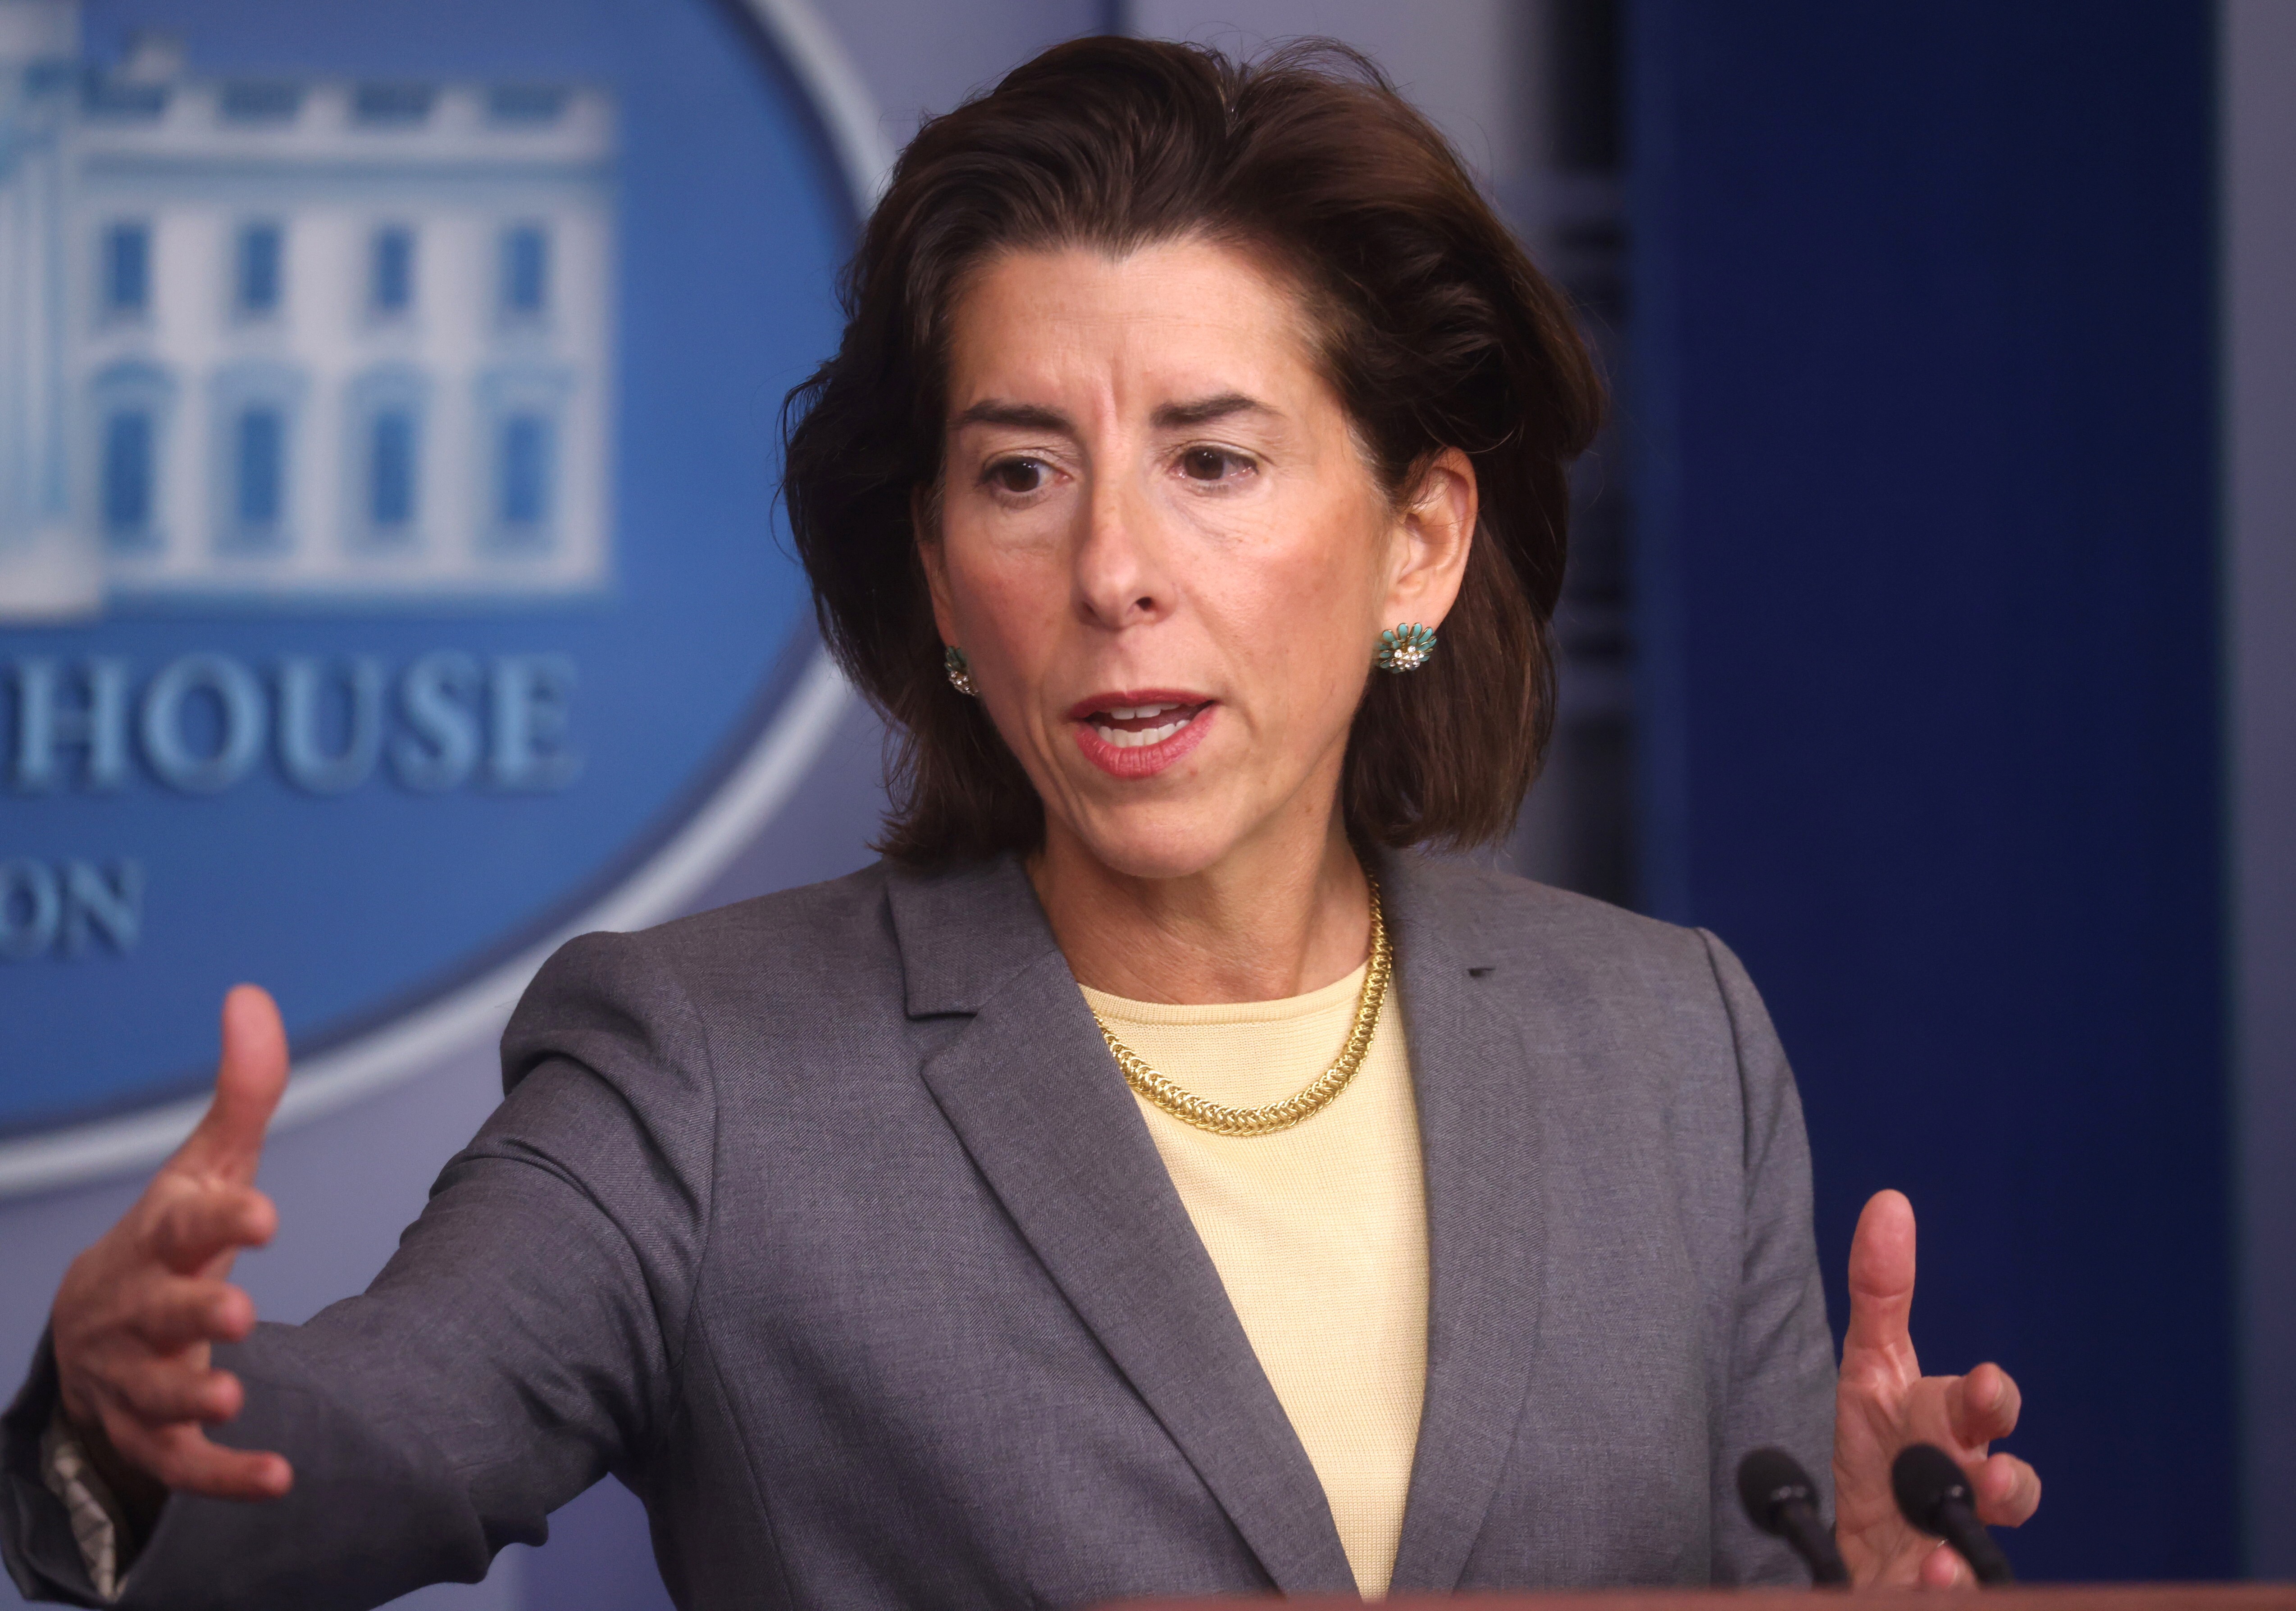 US Secretary of Commerce Gina Raimondo speaks during a press briefing at the White House on Tuesday. Photo: Reuters